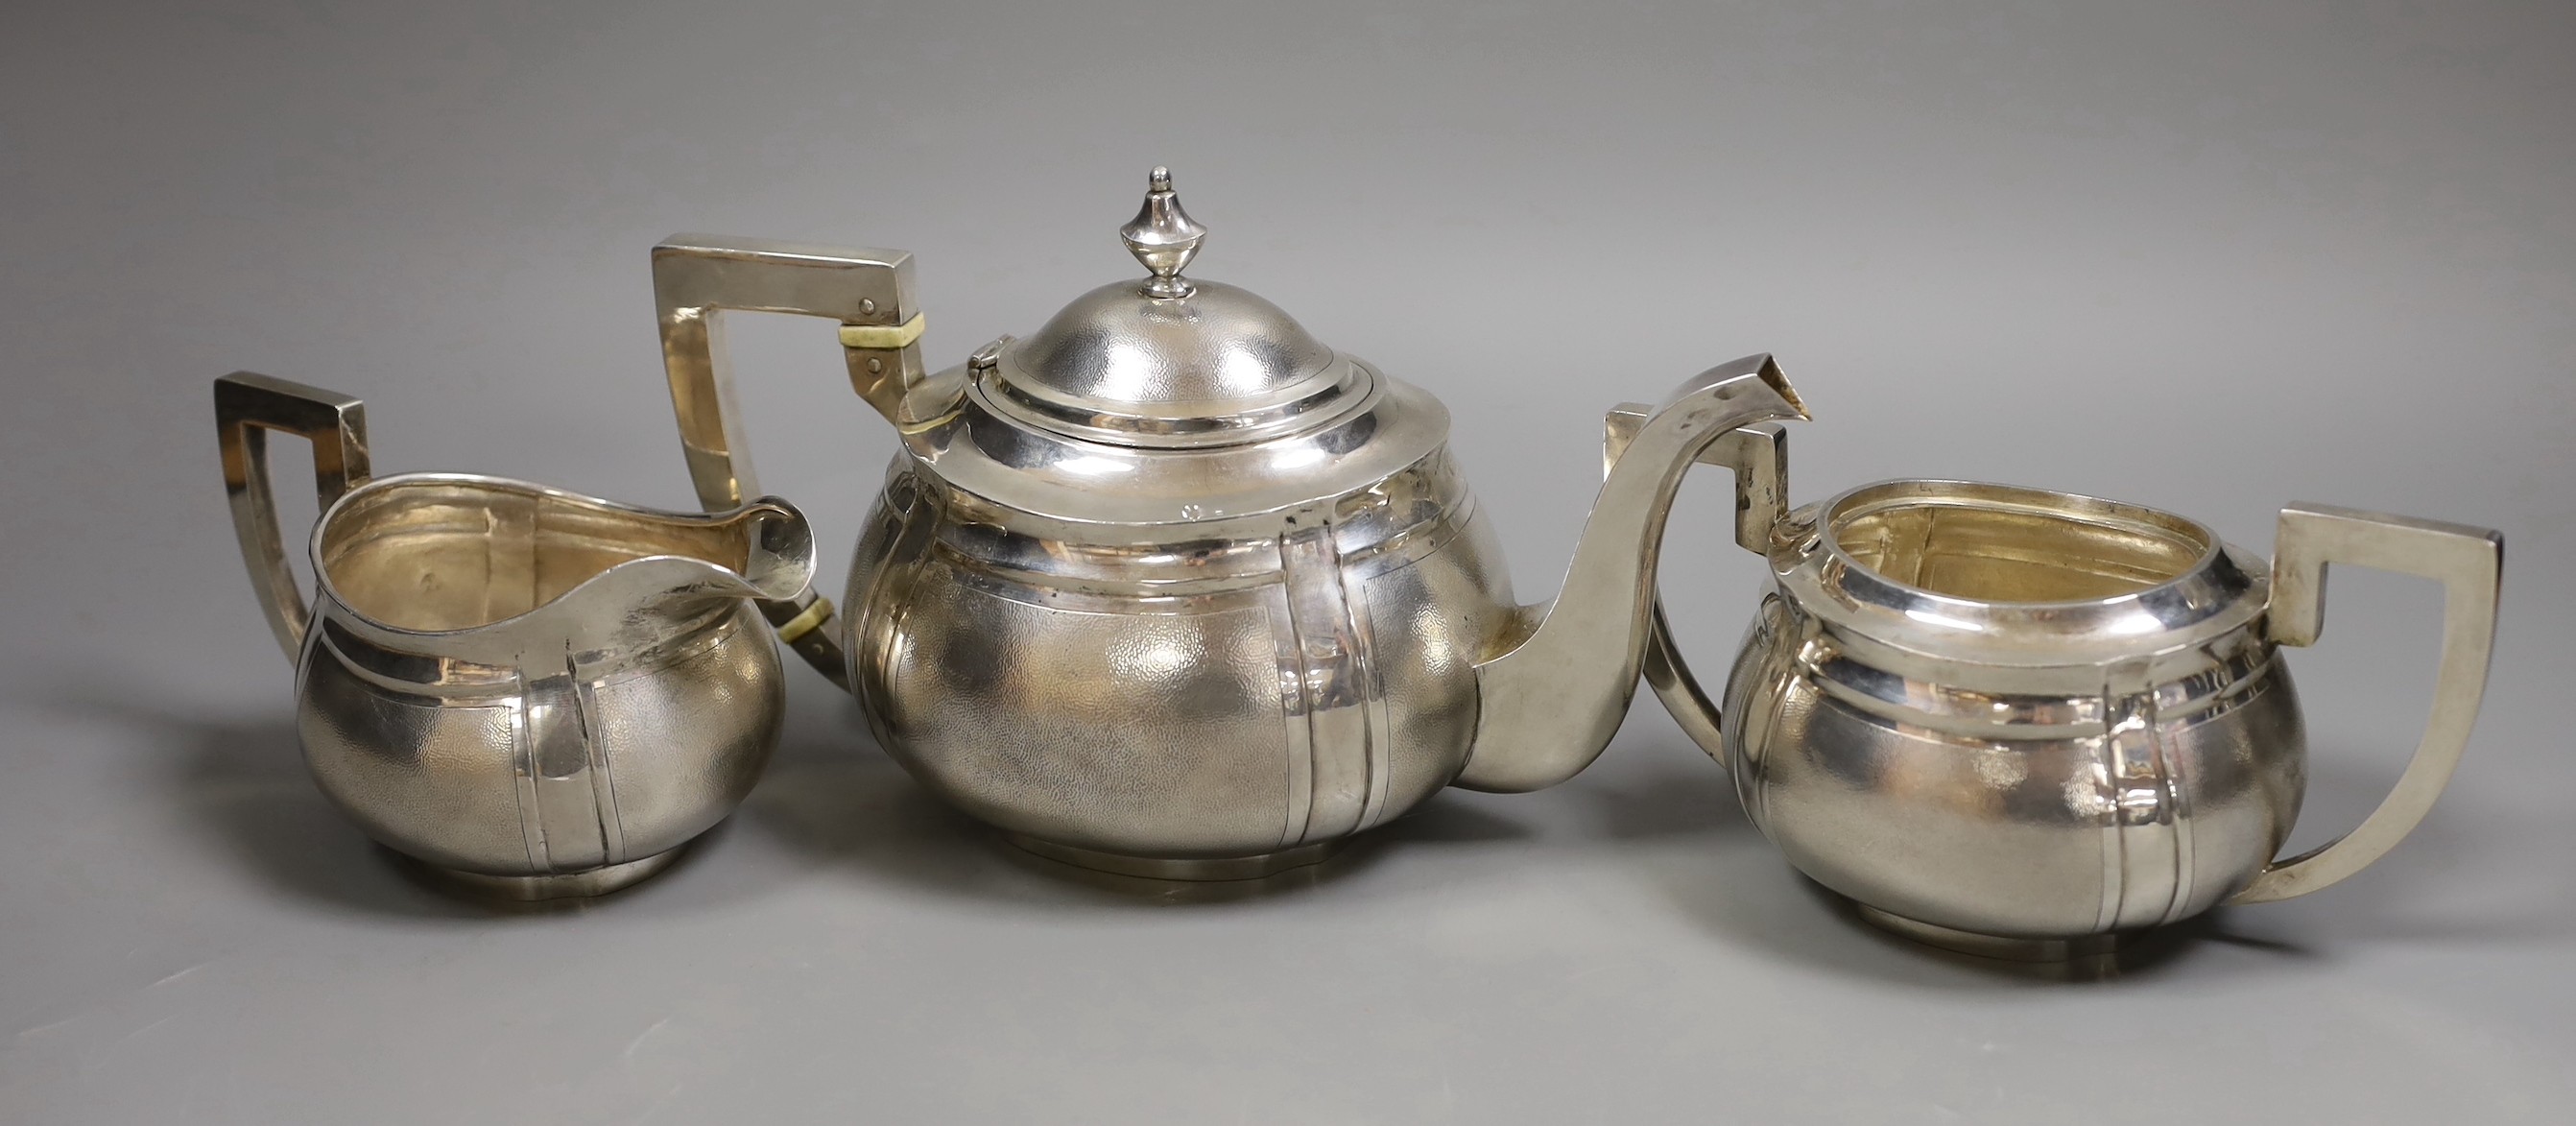 An early 20th century Chinese Export white metal three piece tea set, by Hung Chong?, with bone insulators, gross weight 33oz.